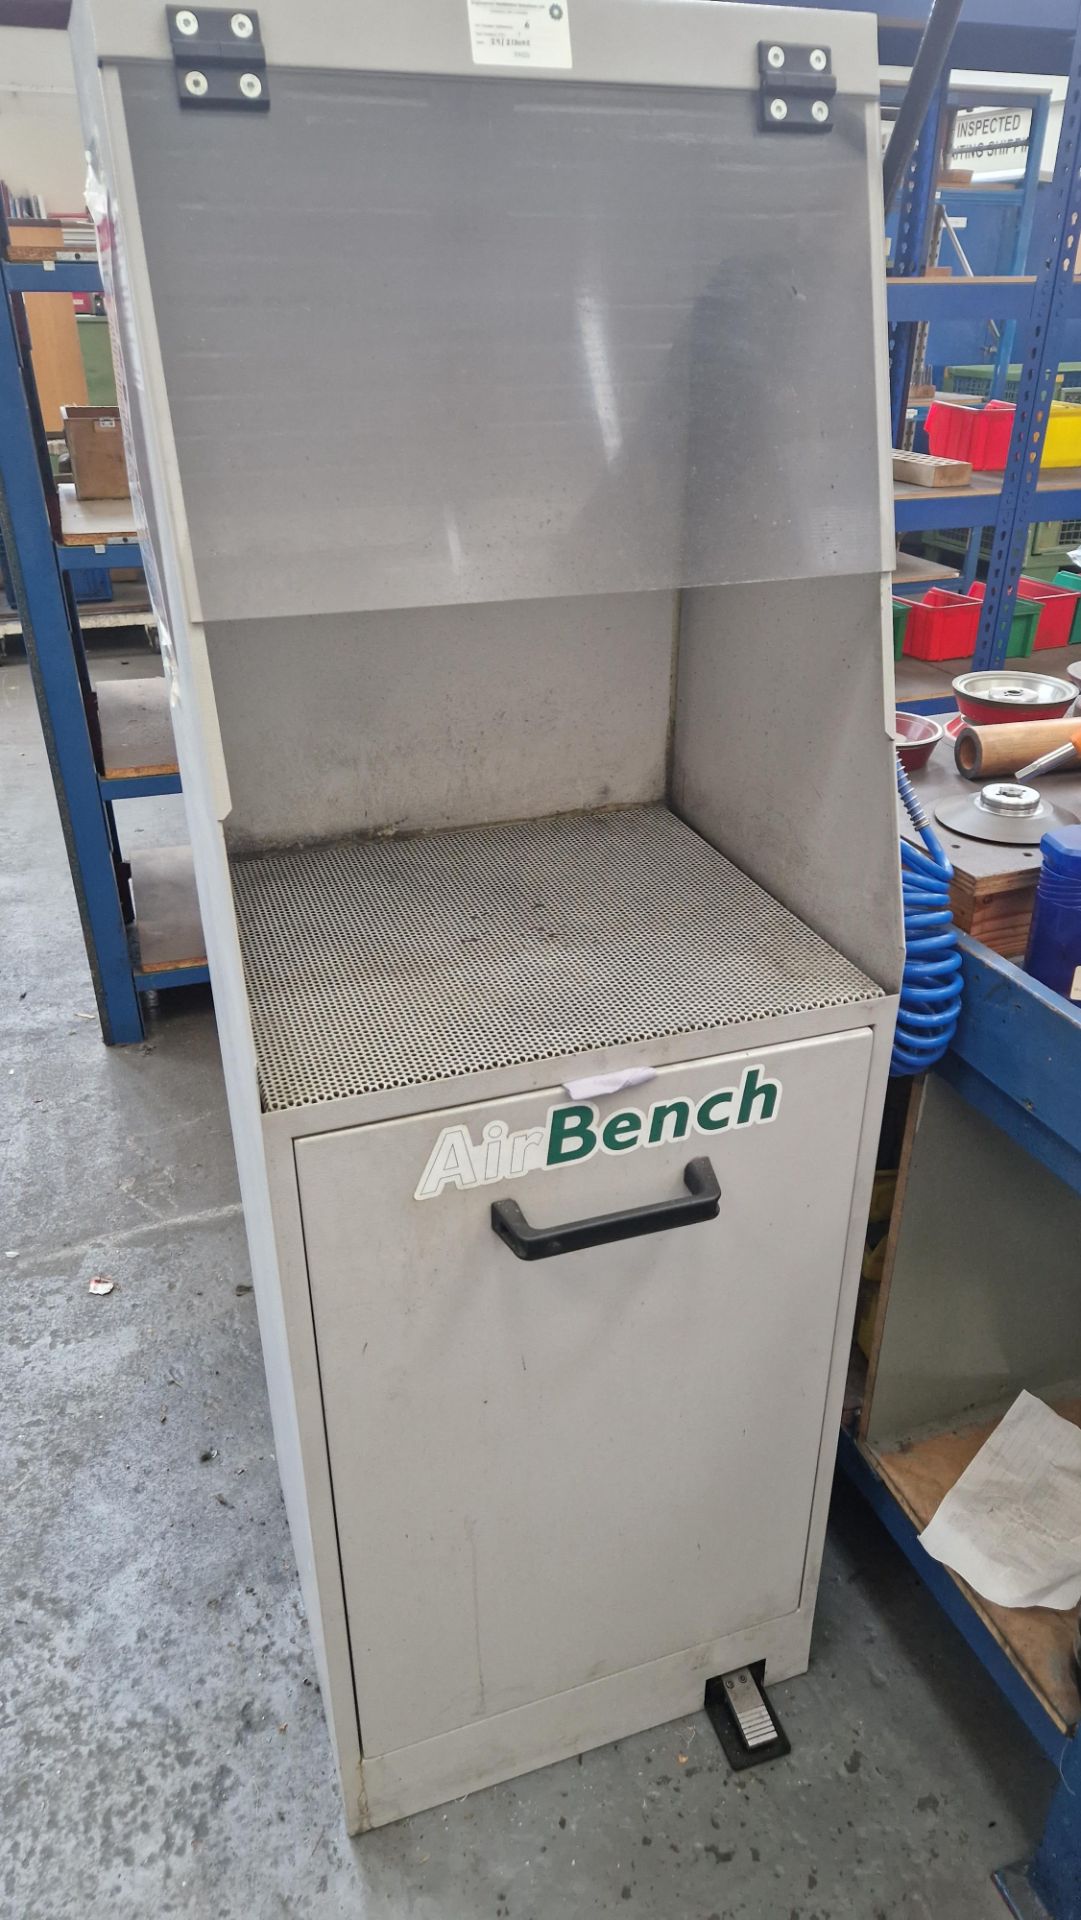 AIR BENCH WITH 24” X 24” WORKING AREA